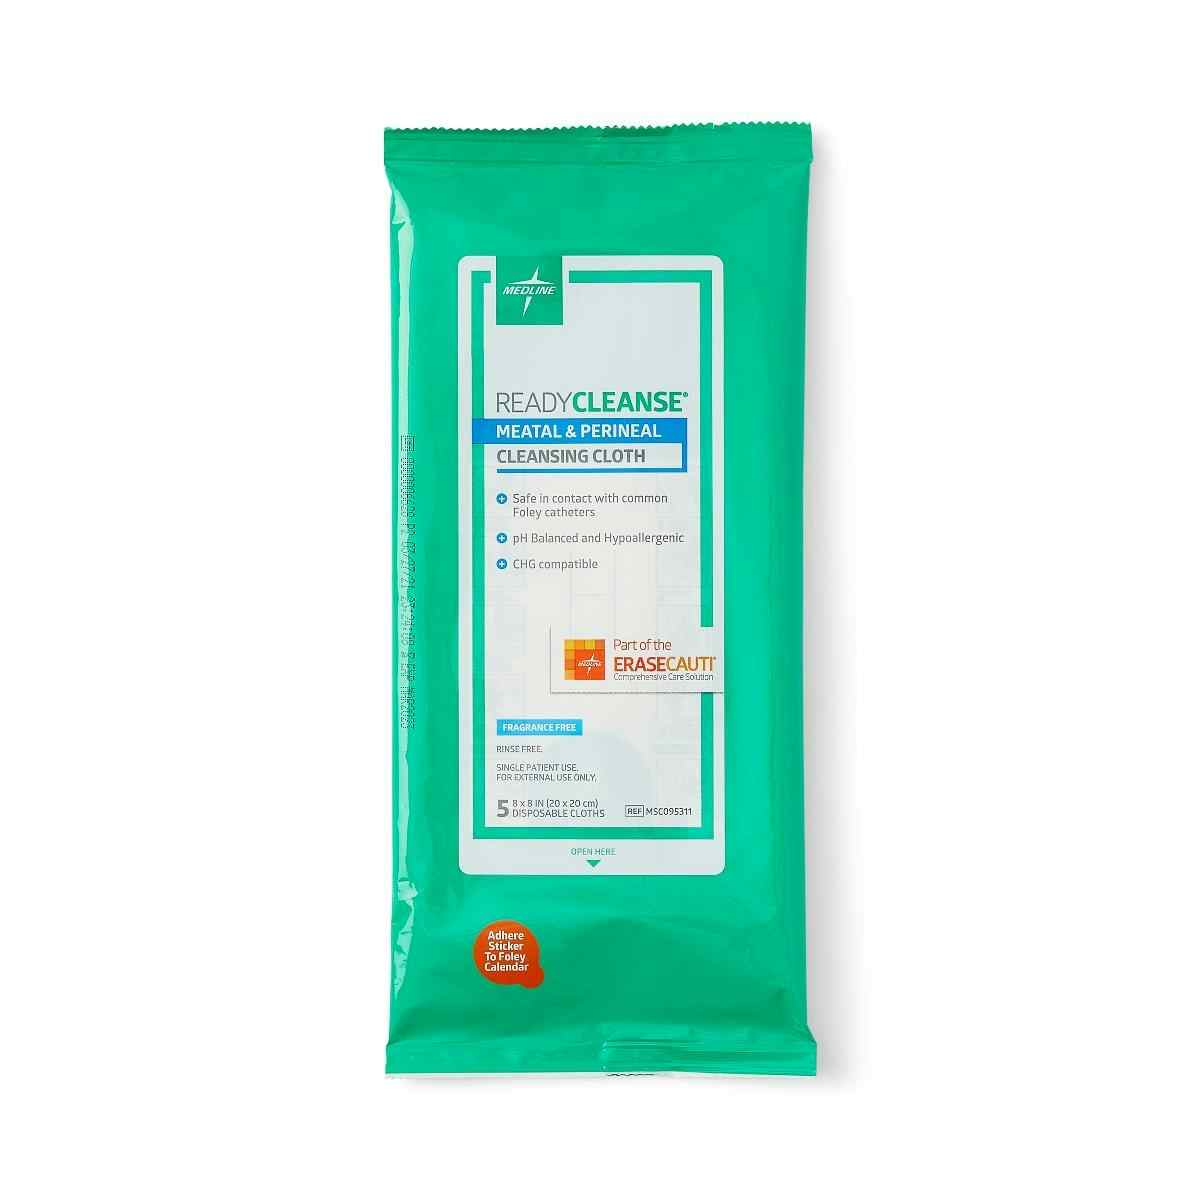 ReadyCleanse Meatal and Perineal Care Cleansing Cloths, MSC095311, Case of 30